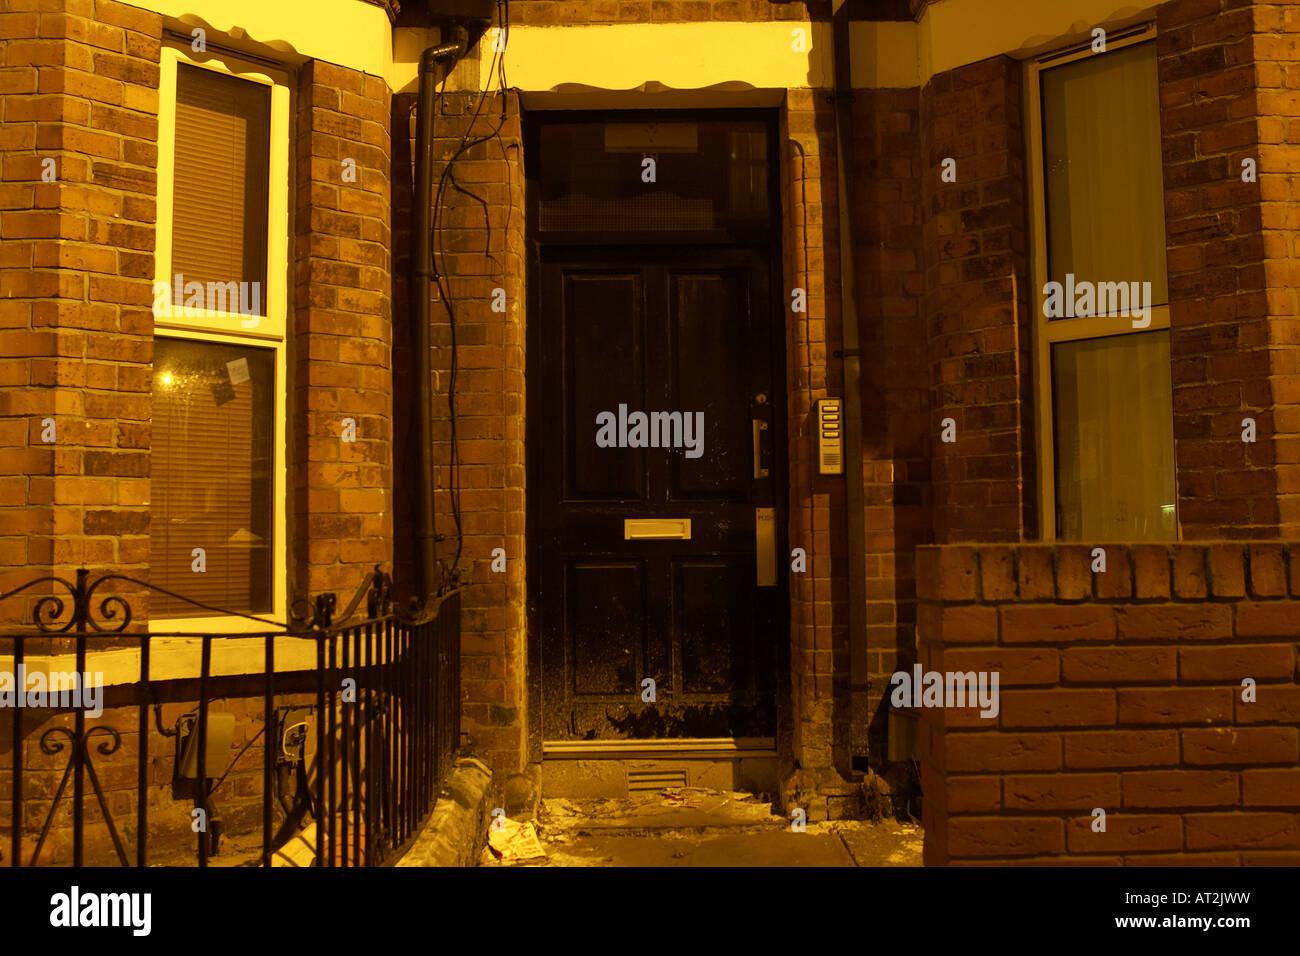 black wooden door entrance to red brick run down building with security intercom buzzer and litter Stock Photo